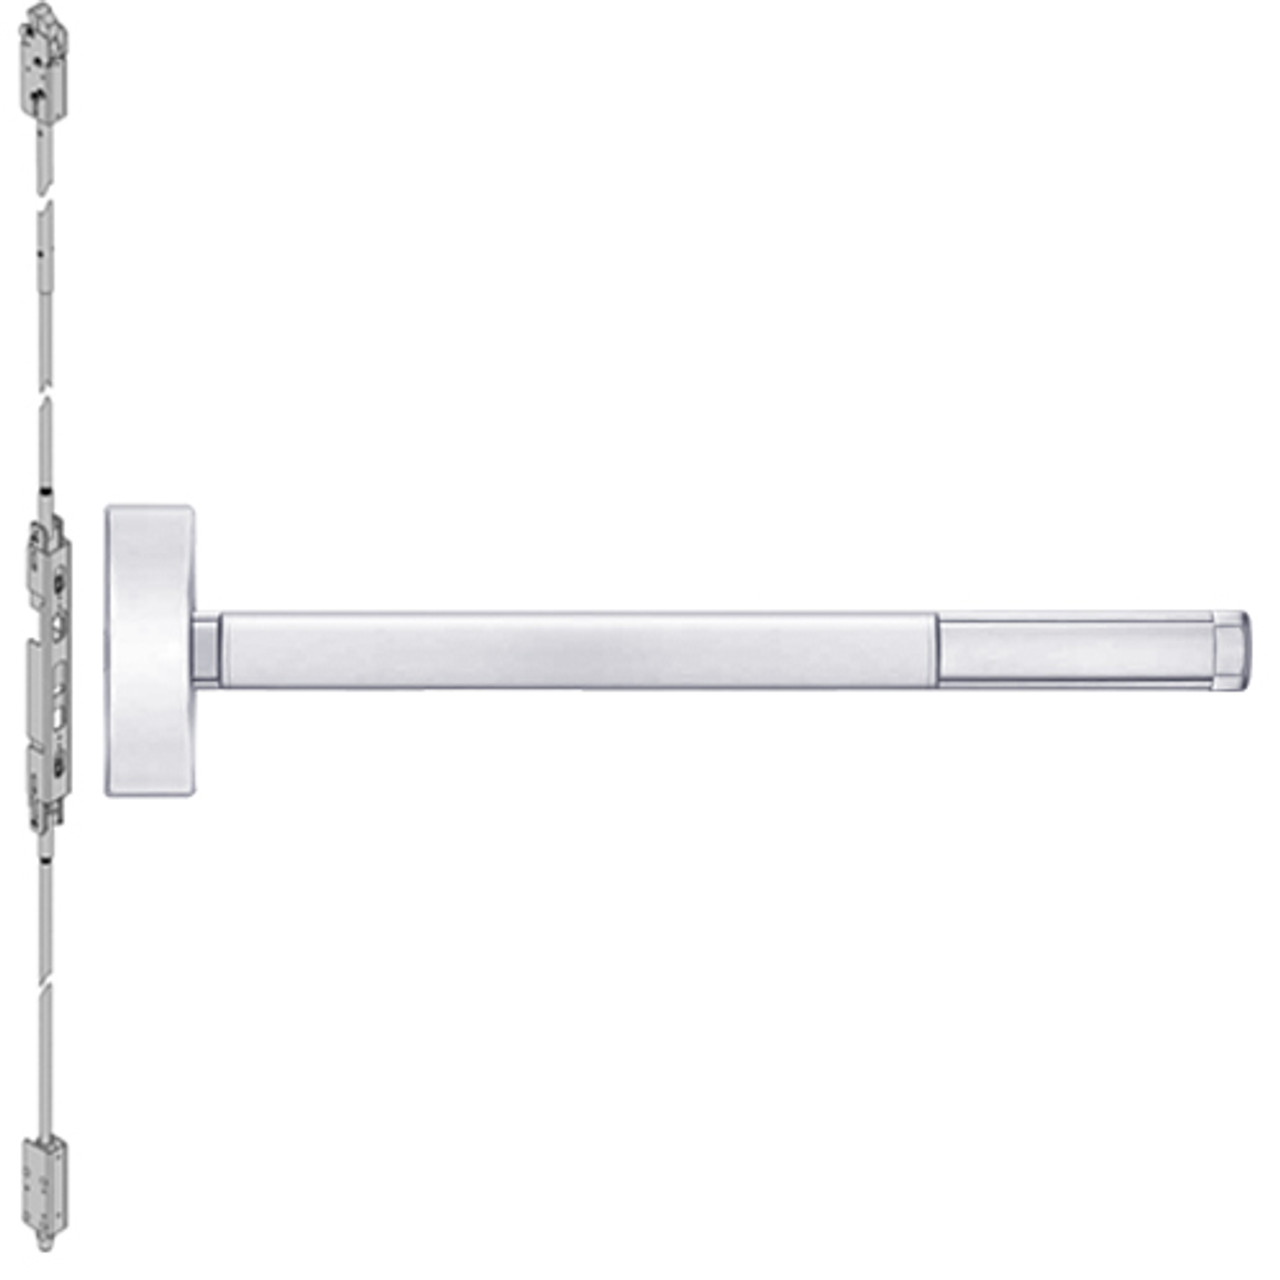 2814-625-48 PHI 2800 Series Non Fire Rated Concealed Vertical Rod Exit Device Prepped for Lever-Knob Always Active in Bright Chrome Finish